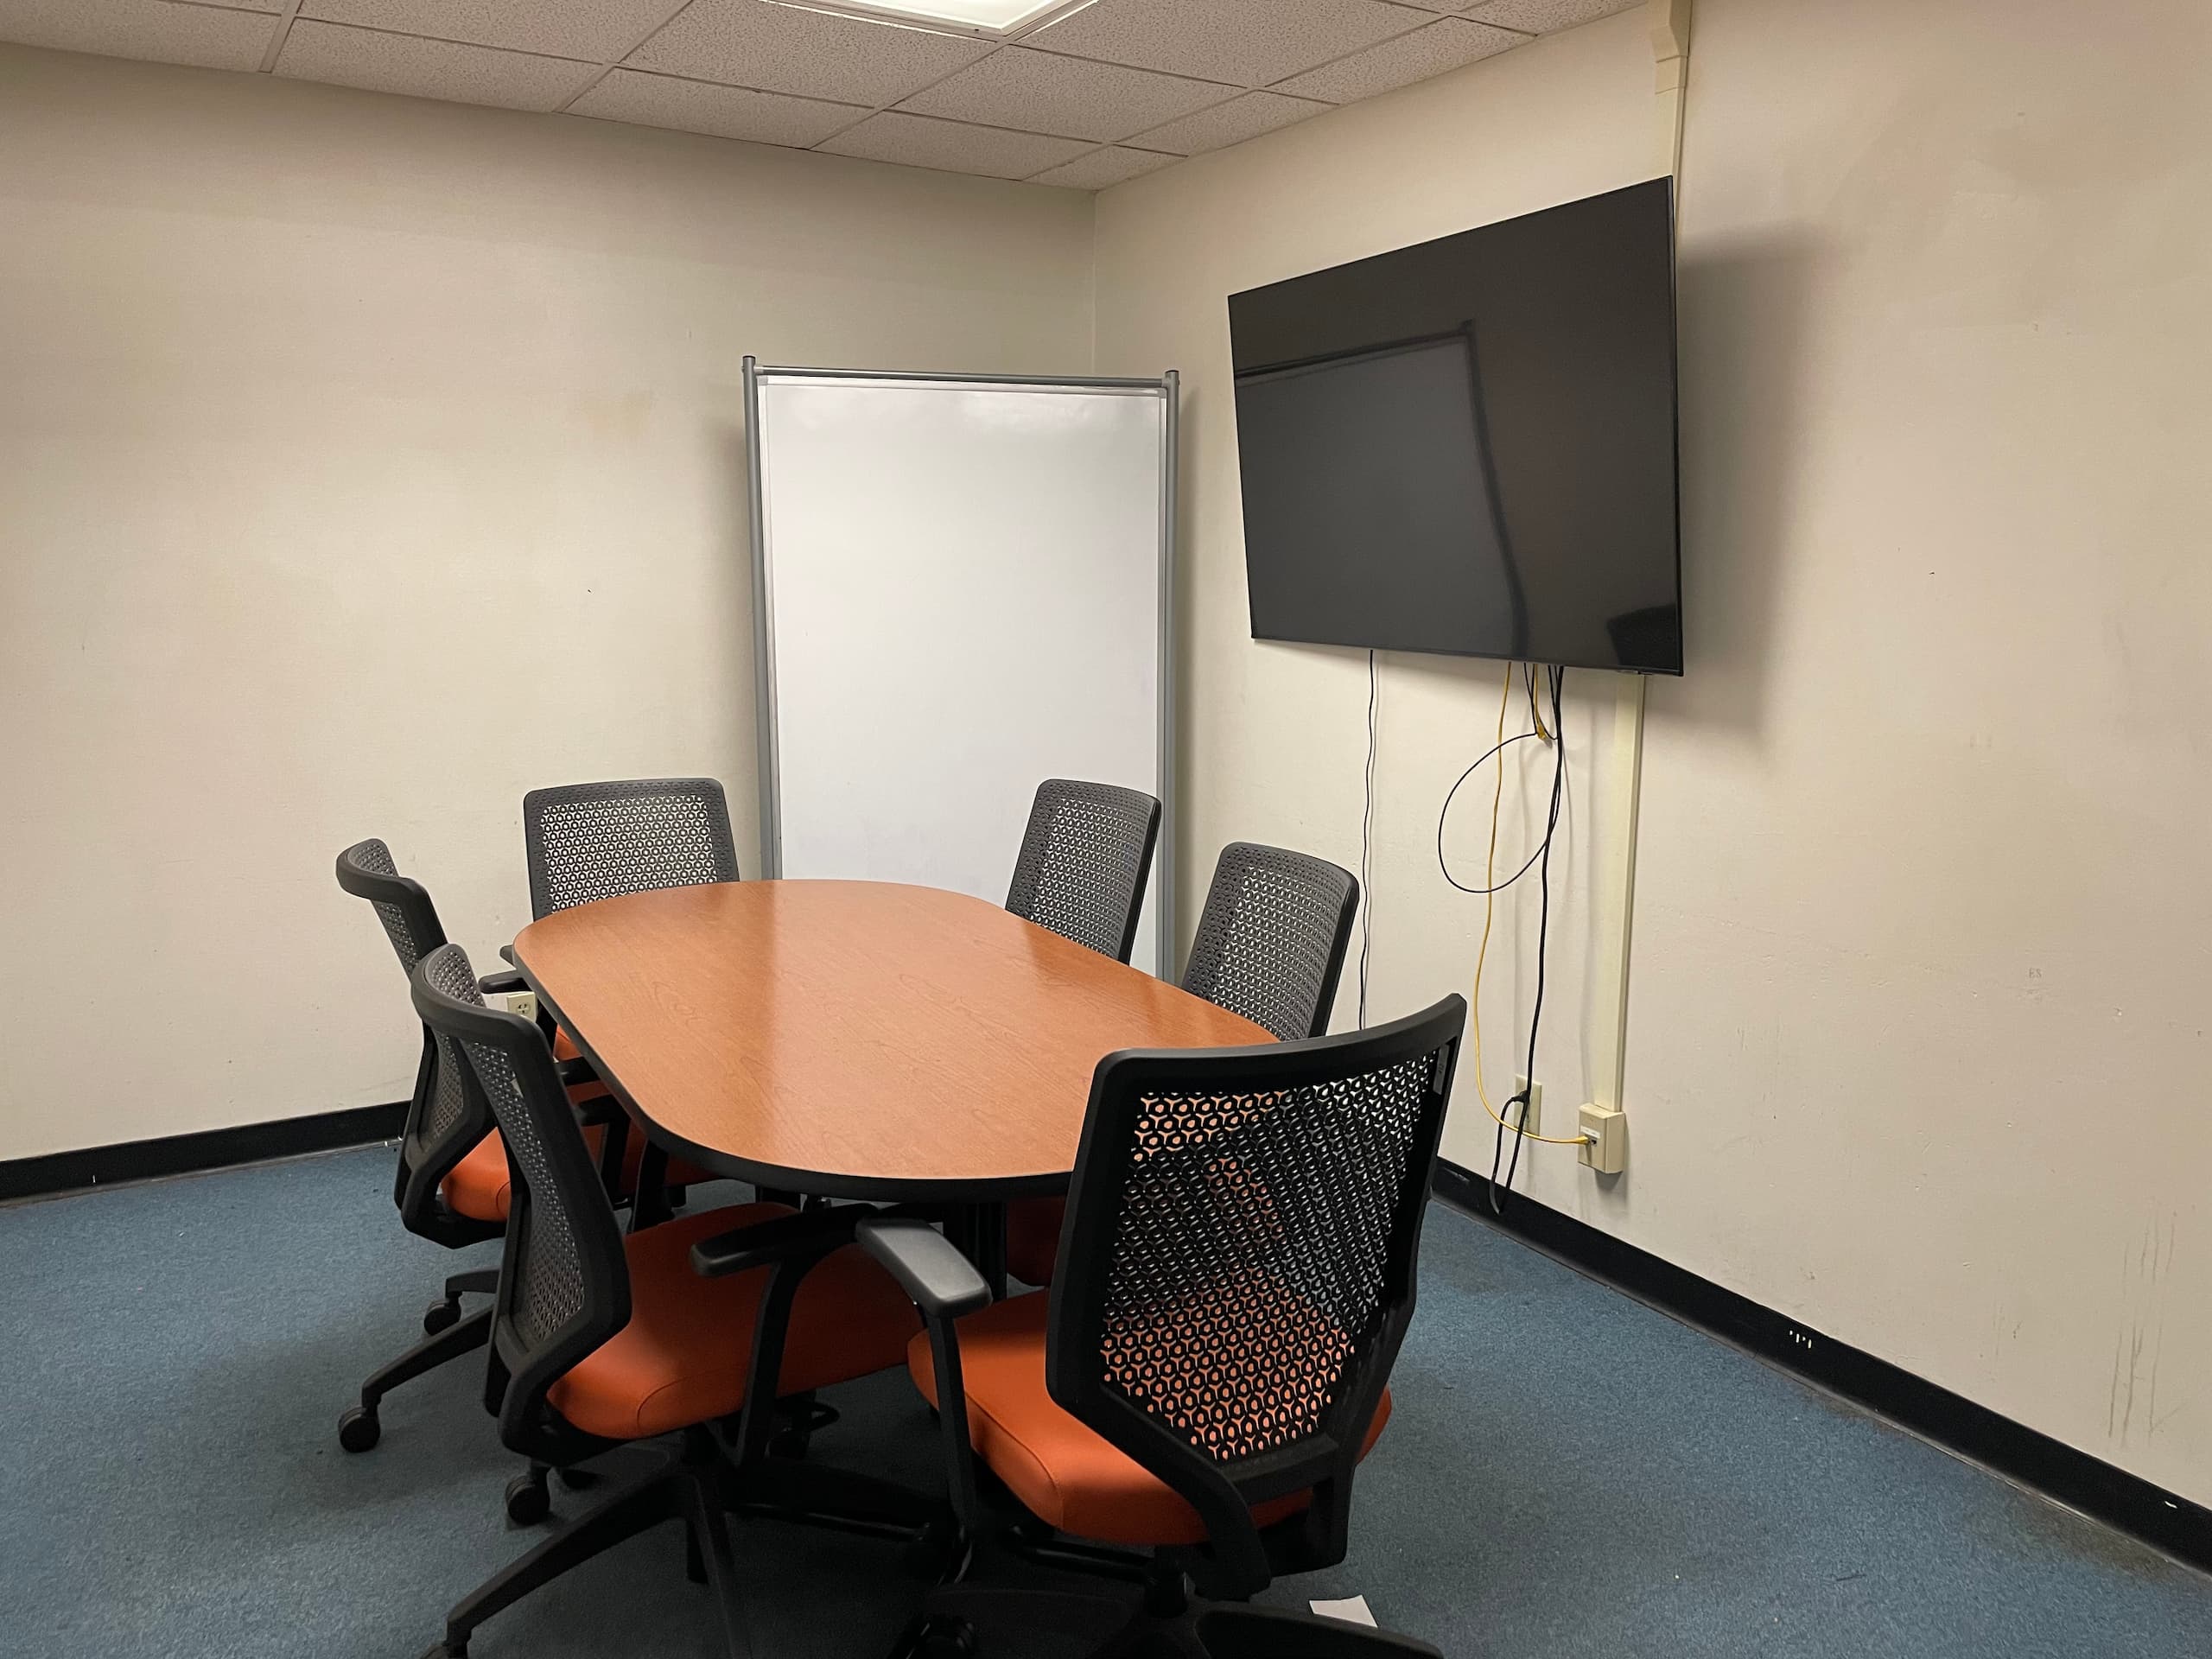 Study room with 6 chairs, display, and whiteboard